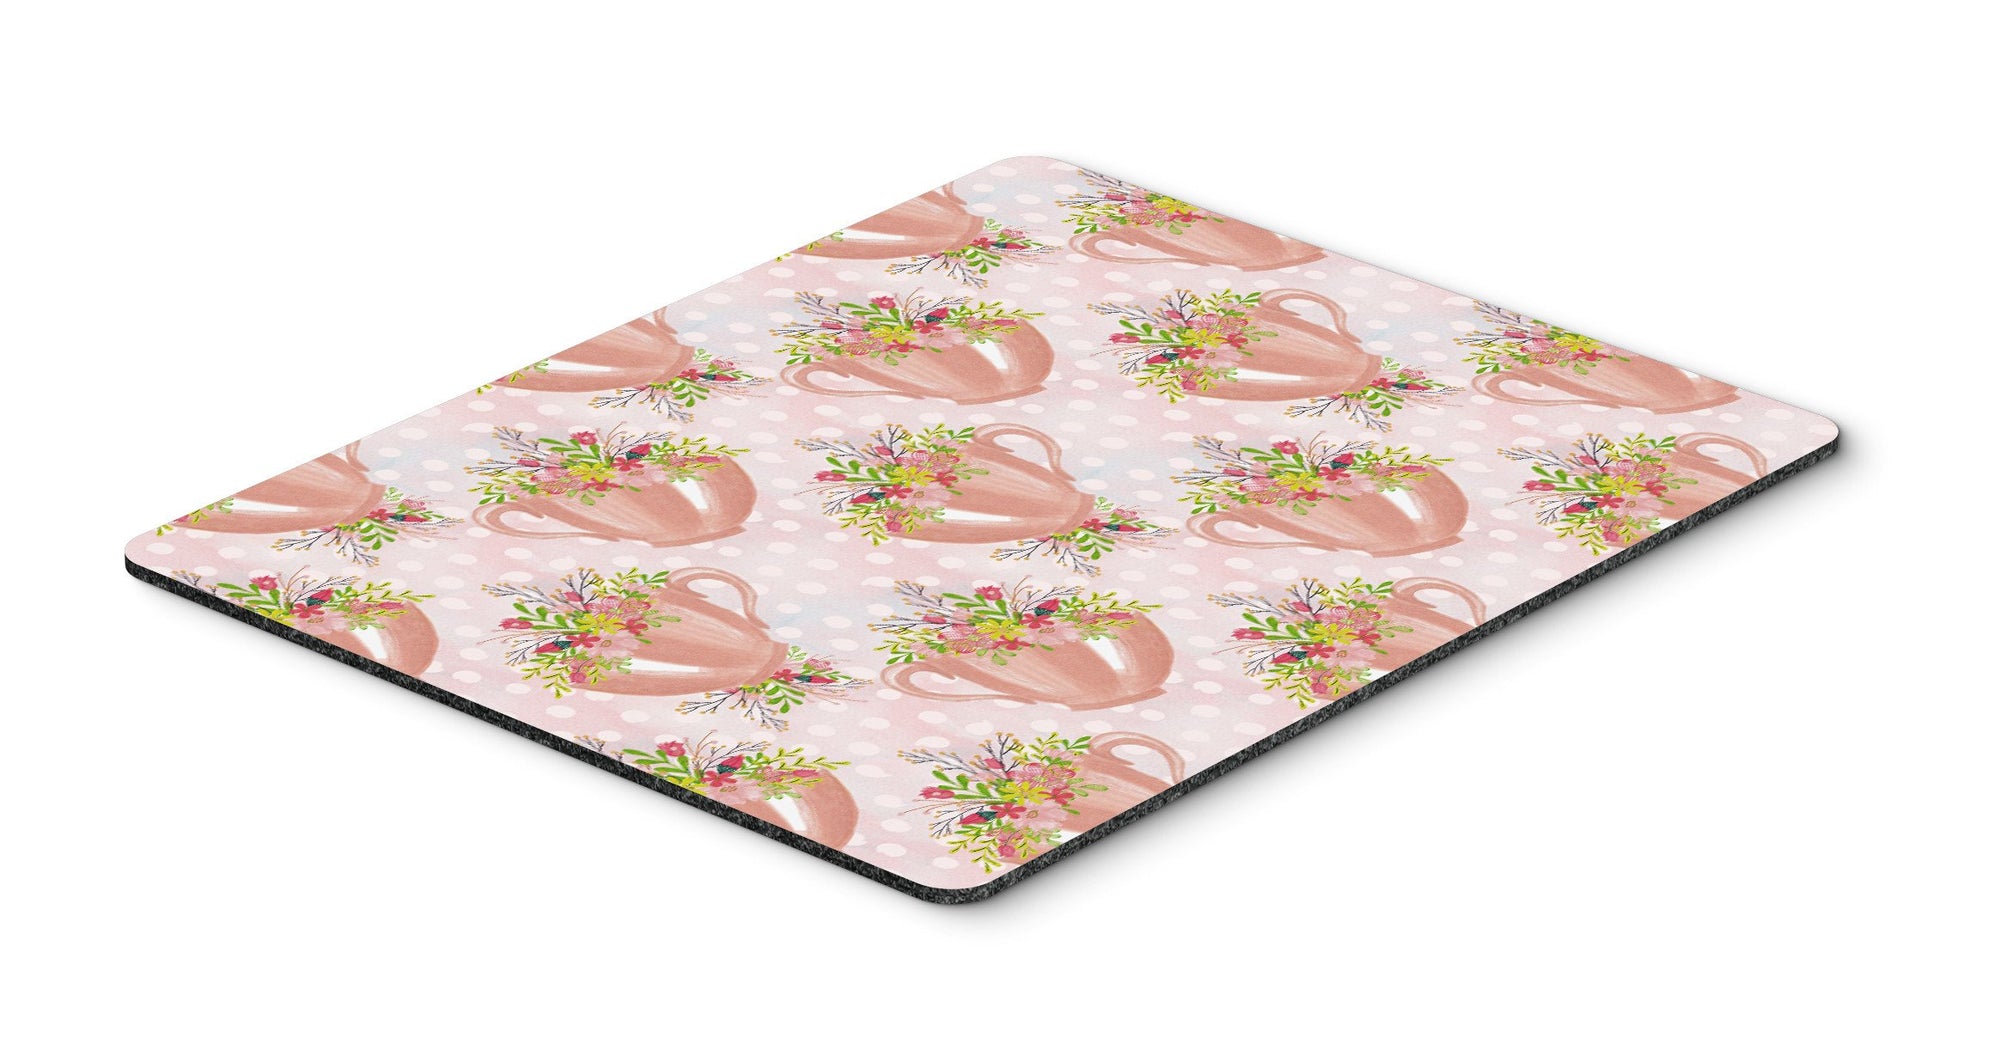 Tea Cup and Flowers Pink Mouse Pad, Hot Pad or Trivet BB7481MP by Caroline's Treasures